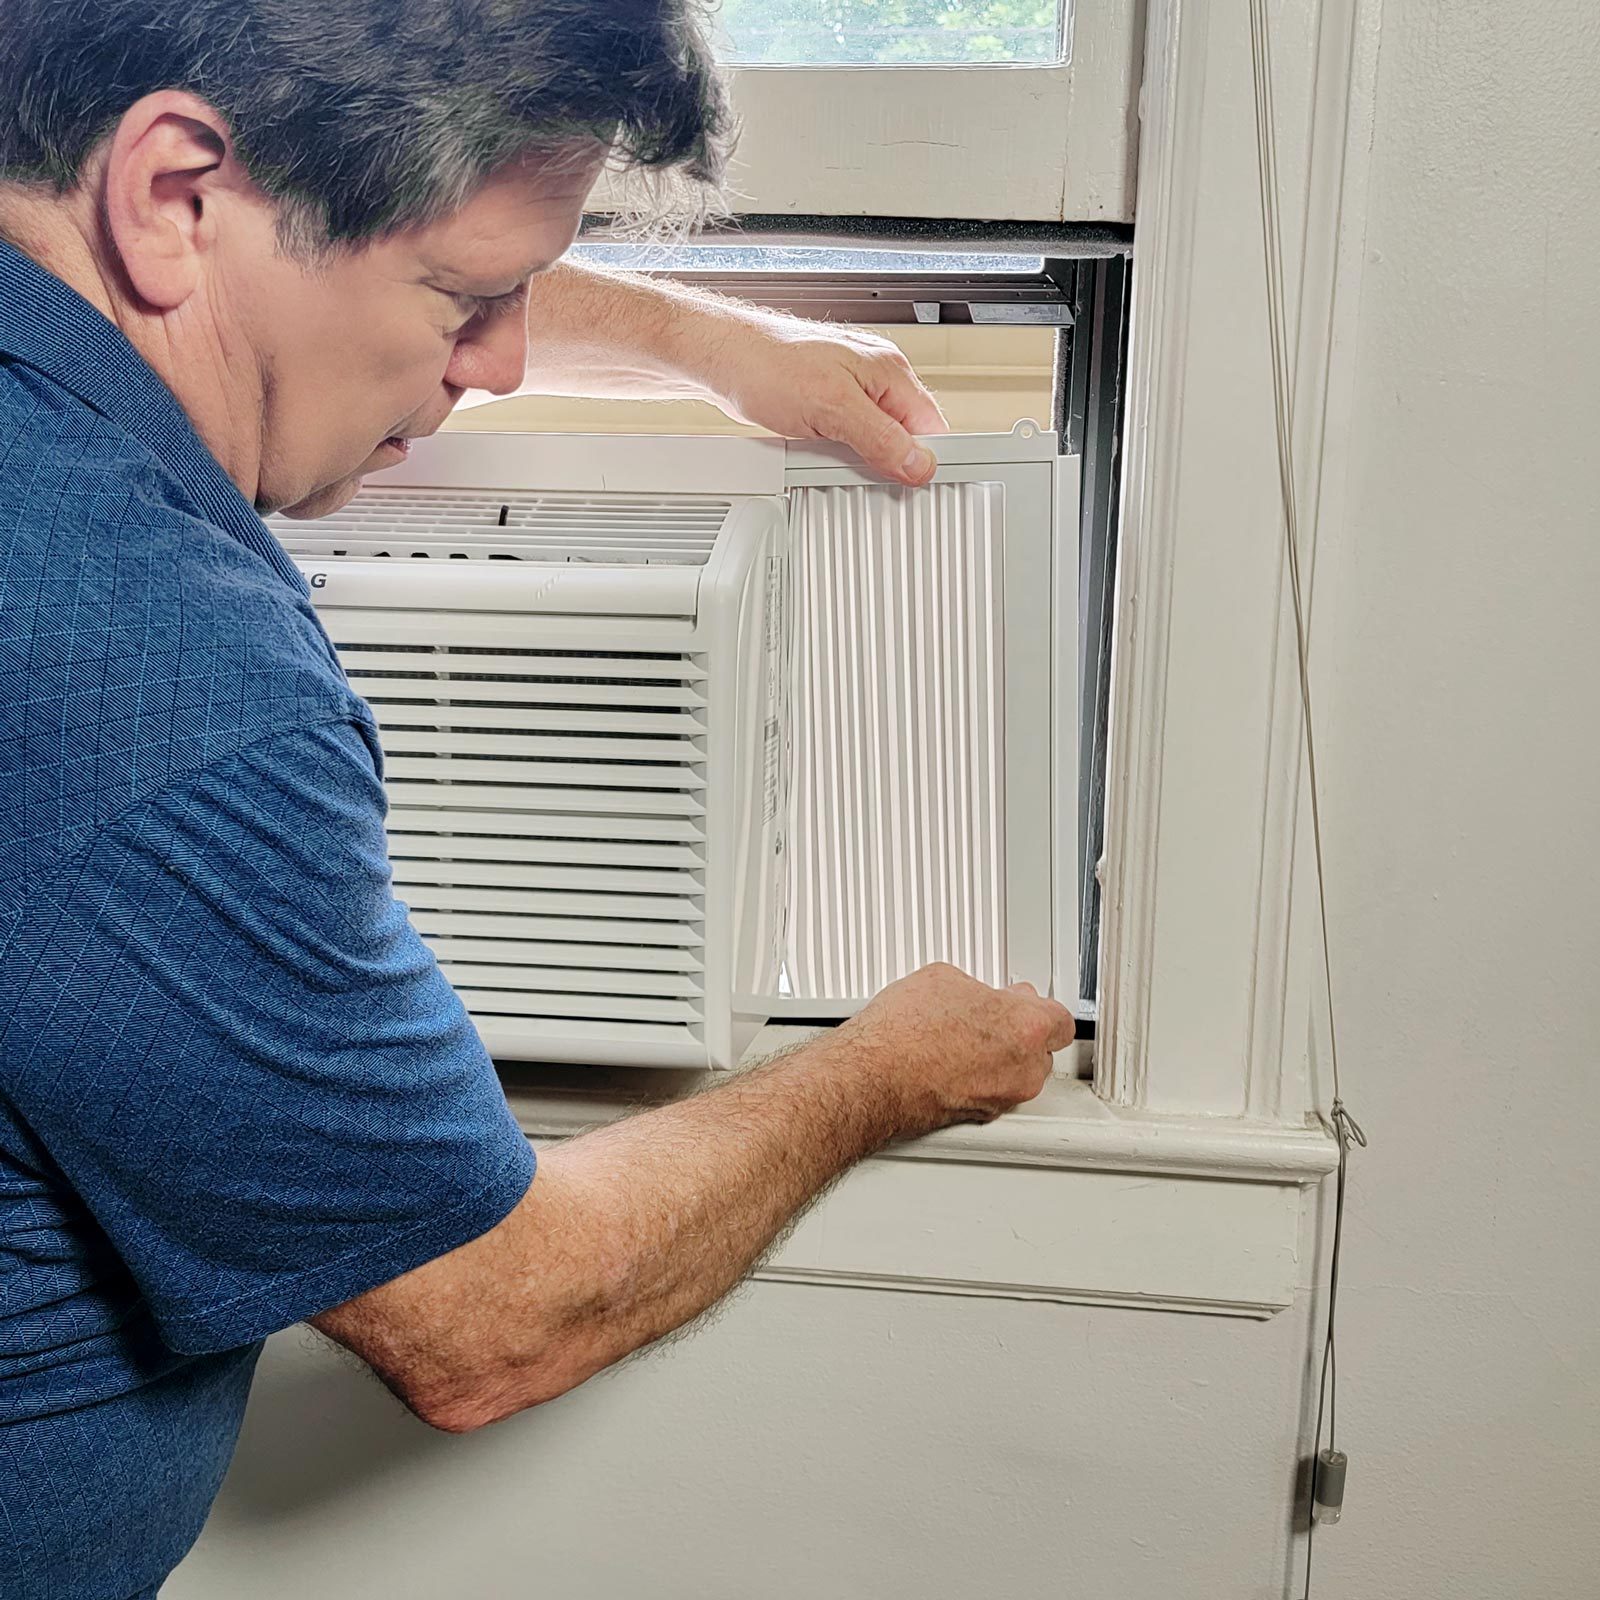 man Expanding the wings on the air conditioner to close the gap on each side